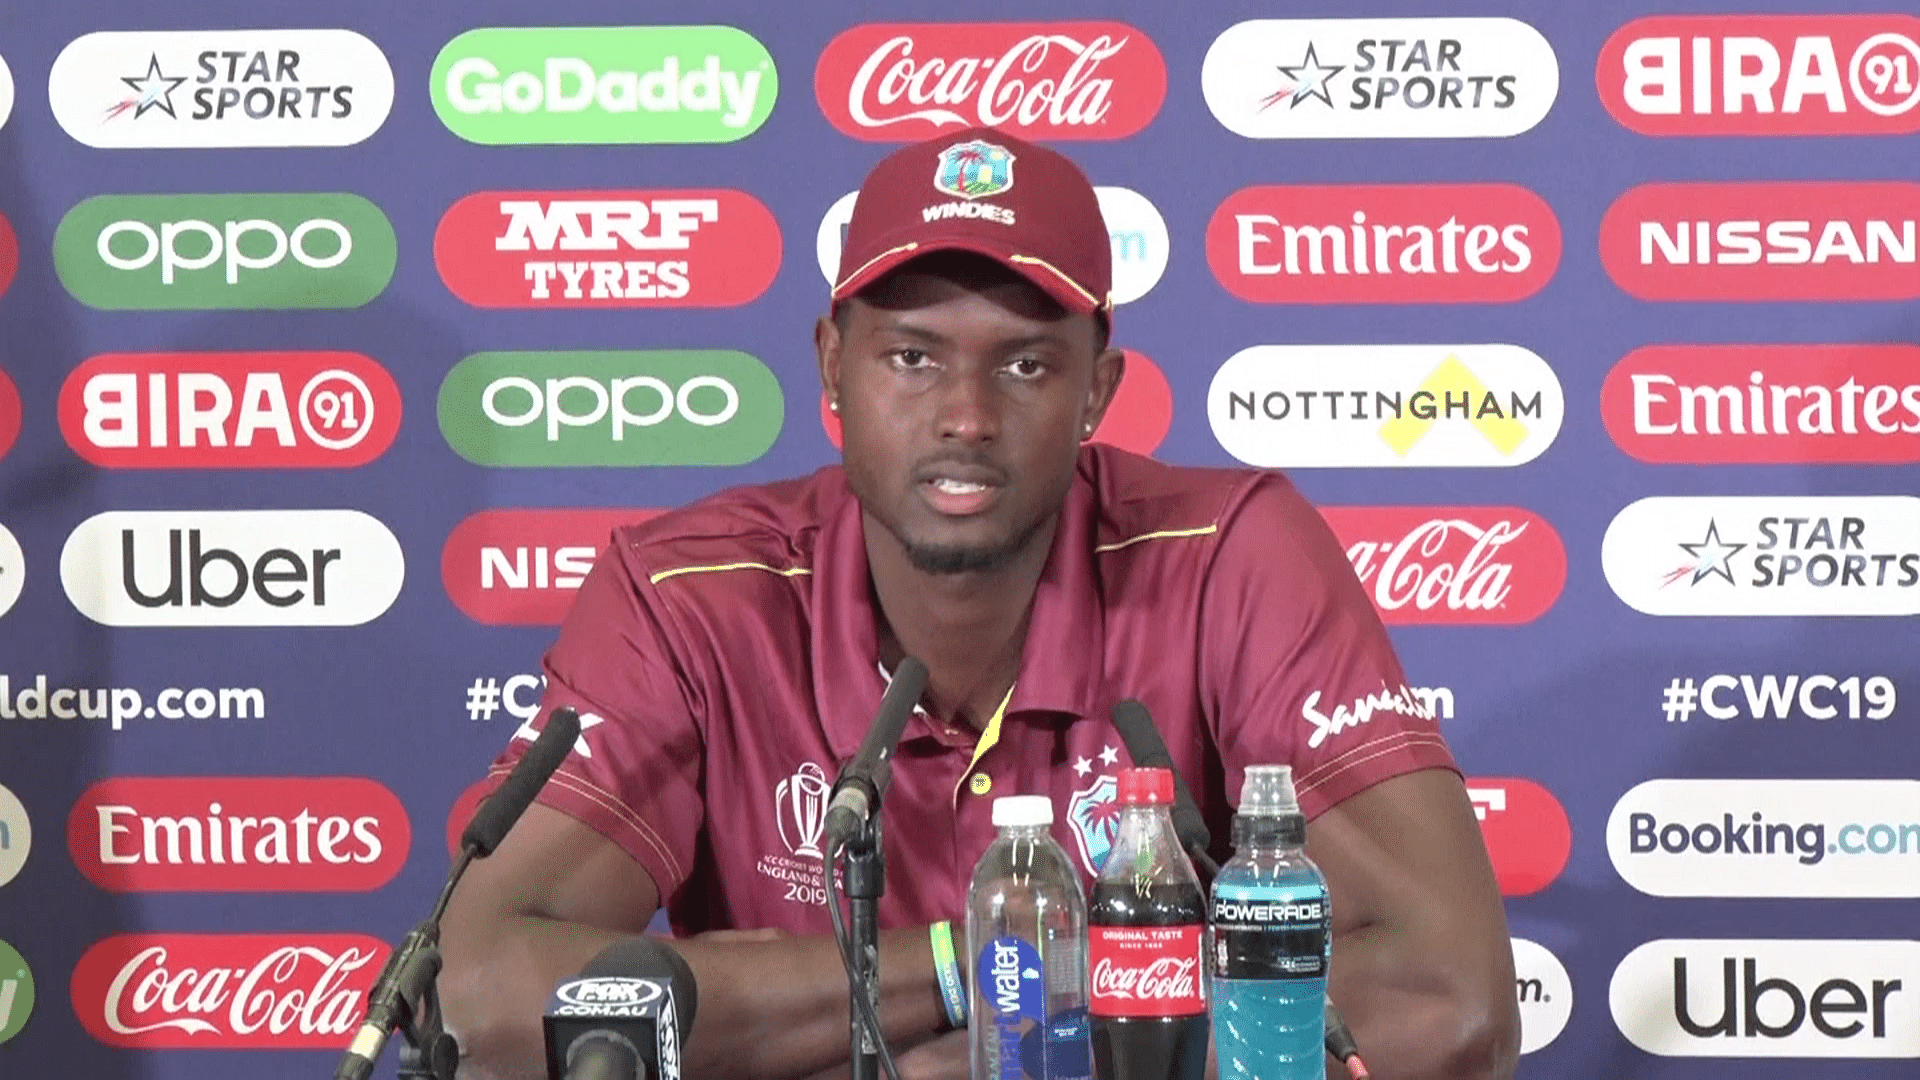 West Indies skipper Jason Holder spoke to the media after the team’s loss to Australia on Thursday.